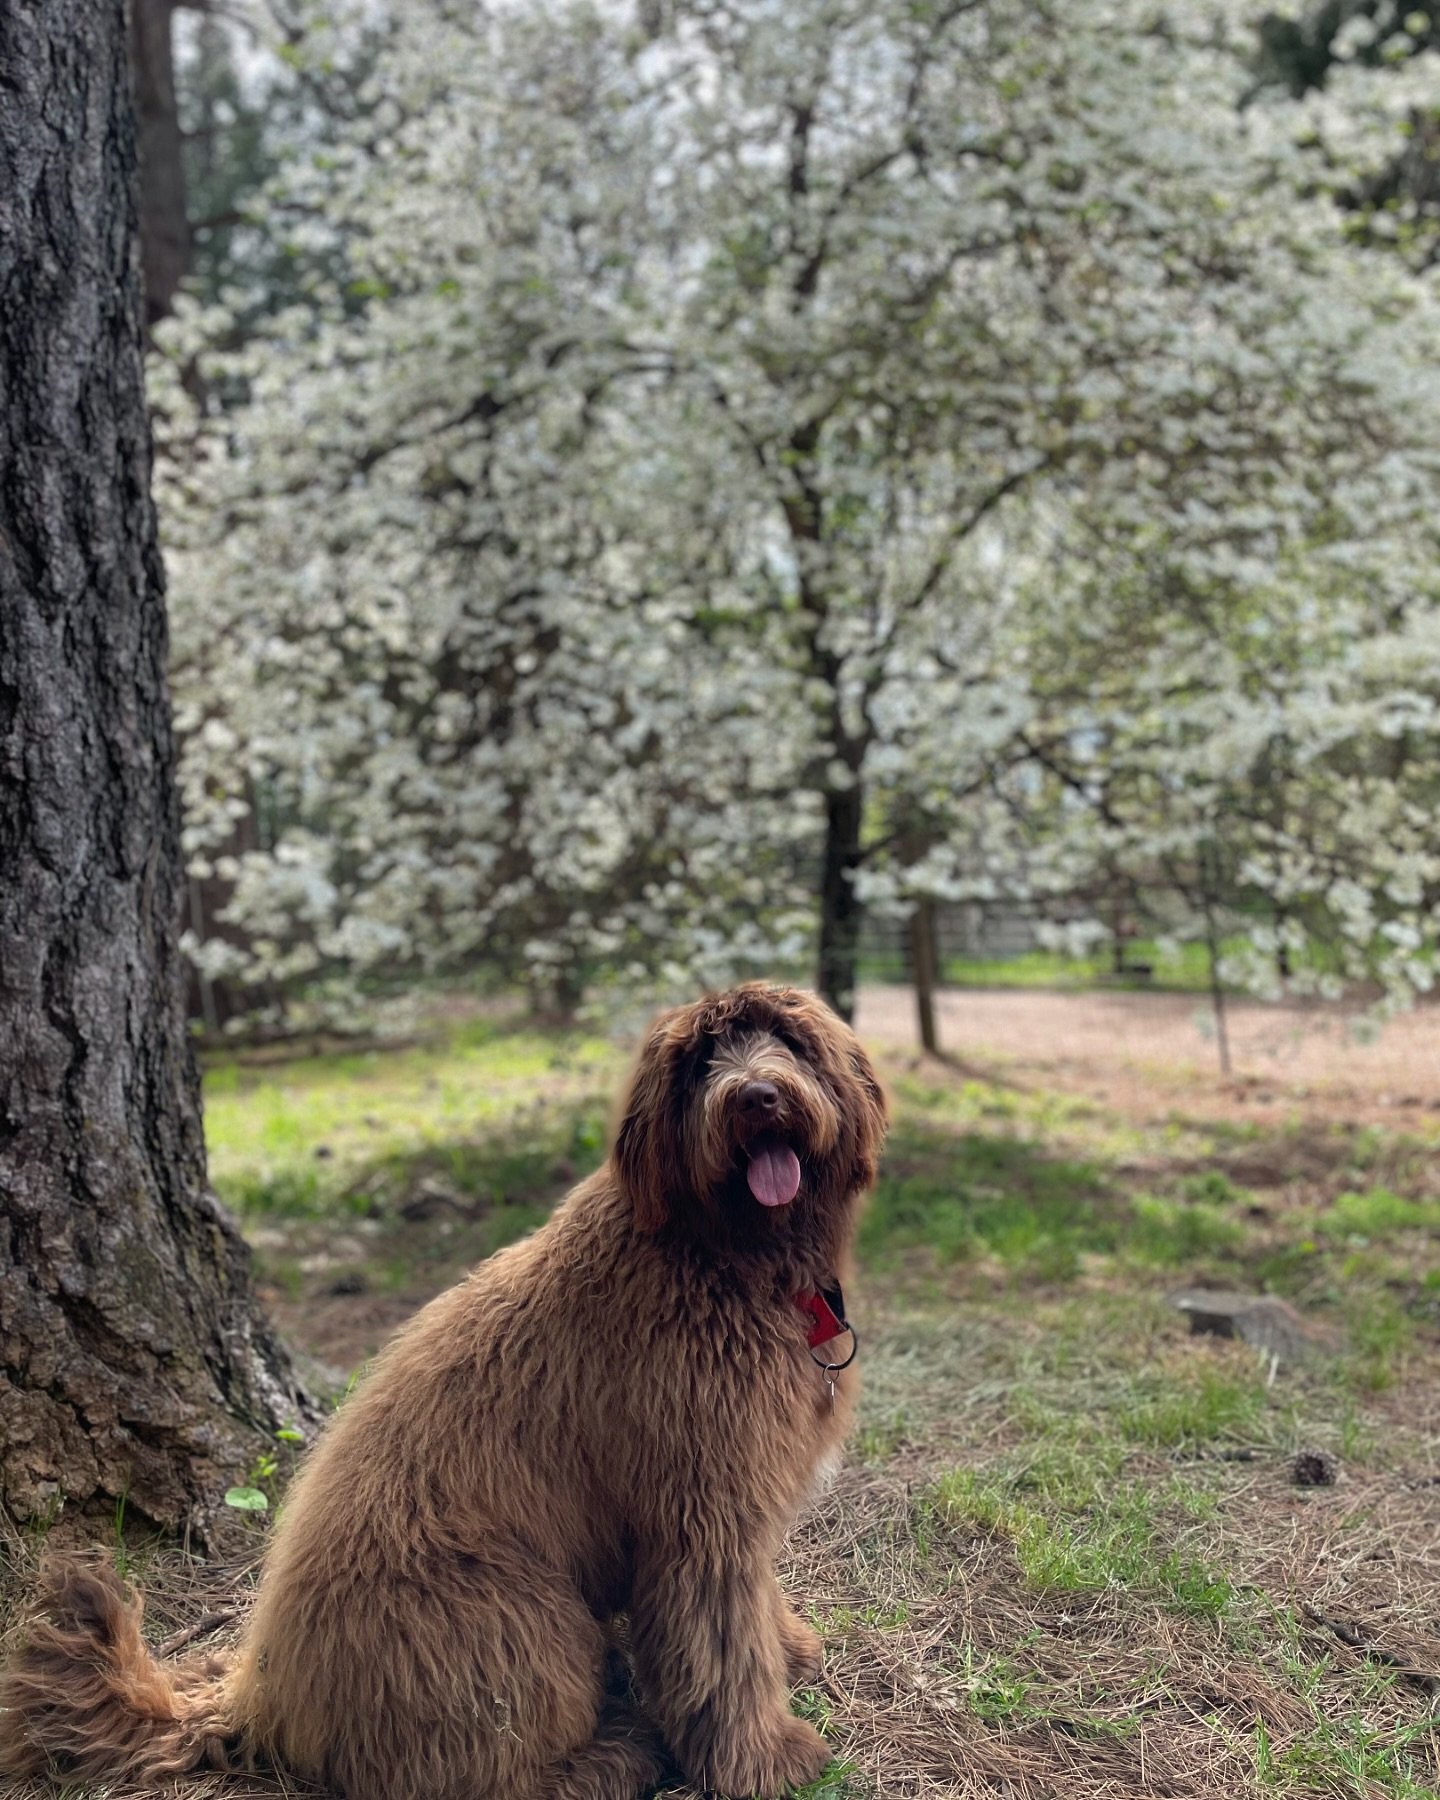 Spring is in the air at DWR and our Dogwood is blooming😍 Grizzly is the 1st pup of our Dogwood series&hellip;stay tuned for more pup selfies coming soon🐾
🐶Grizzly, 9 month old Golden Aussie Doodle from Cool, CA
.
.
.
#goldendoodle #aussie #dogboar